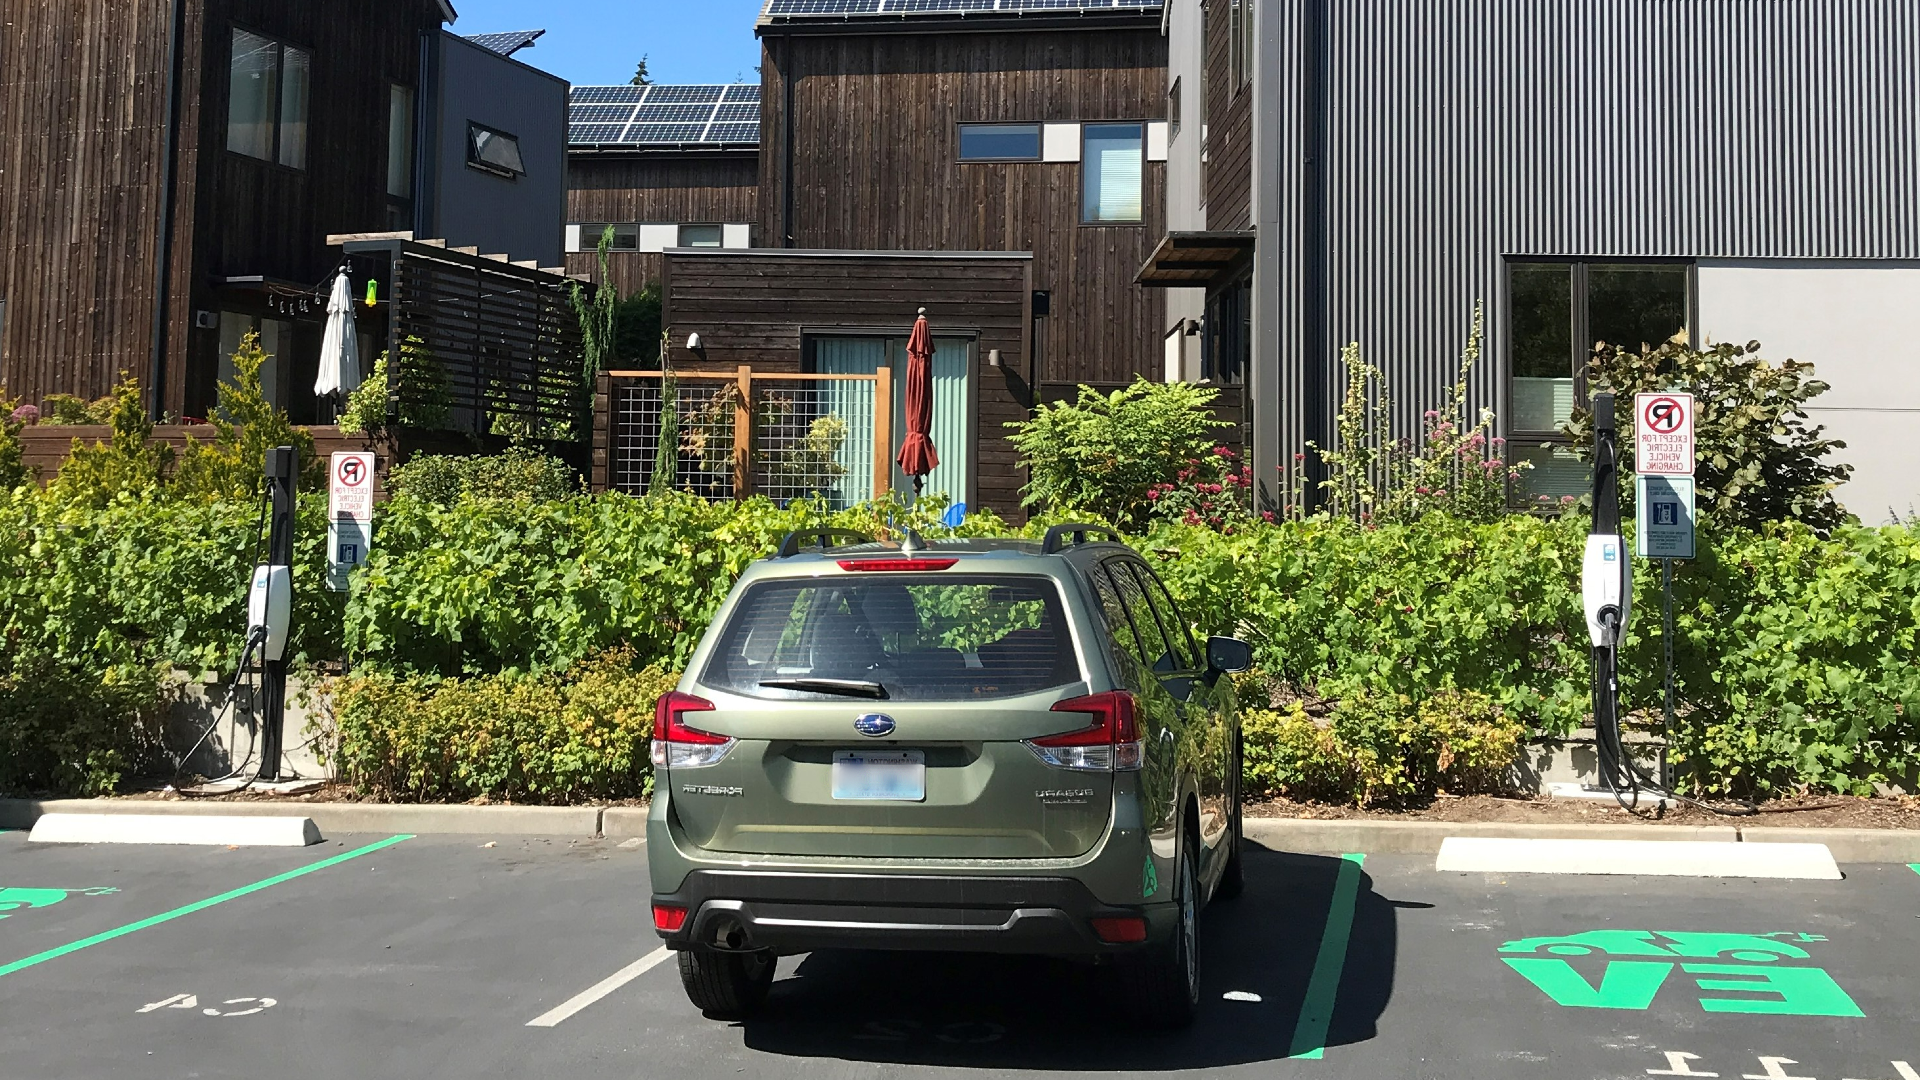 Grow Community on Bainbridge Island was one of 35 properties in our service area to receive 电动汽车 charging for its tenants through our 多户收费 pilot.